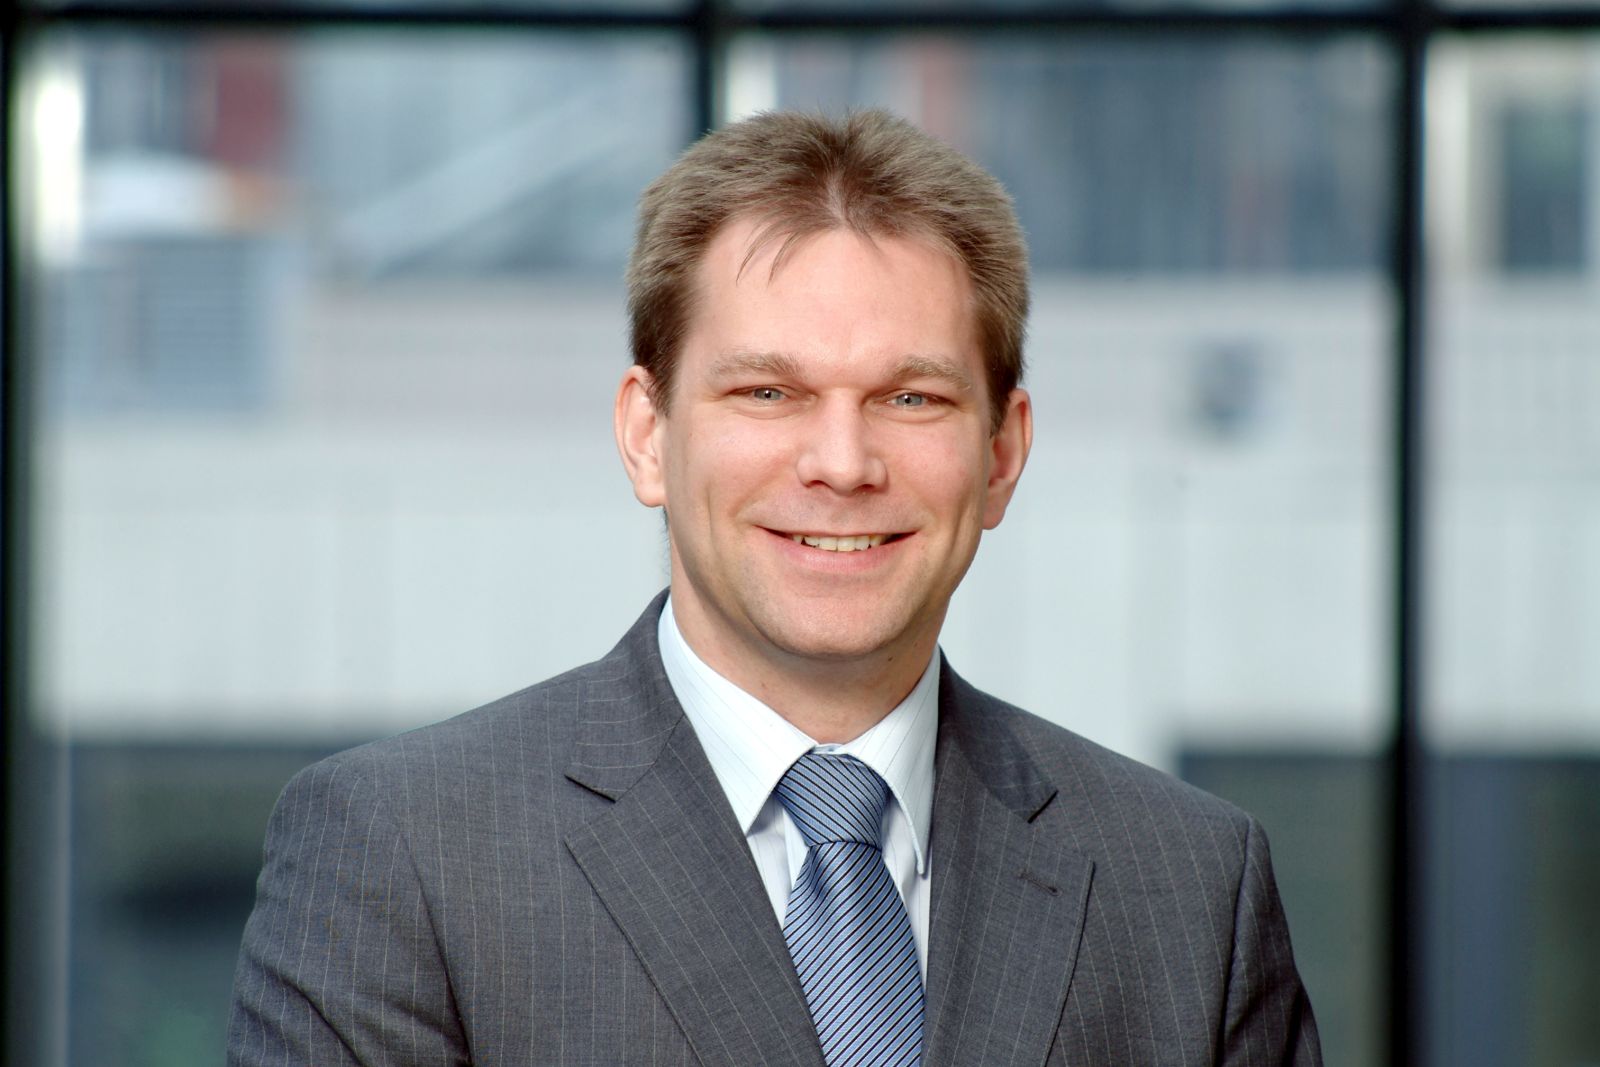 Prof. Ingomar Kelbassa will take over as director of the Fraunhofer Research Institution for Additive Manufacturing Technologies IAPT in Hamburg on April 1, 2022. He succeeds Prof. Ralf-Eckhard Beyer.